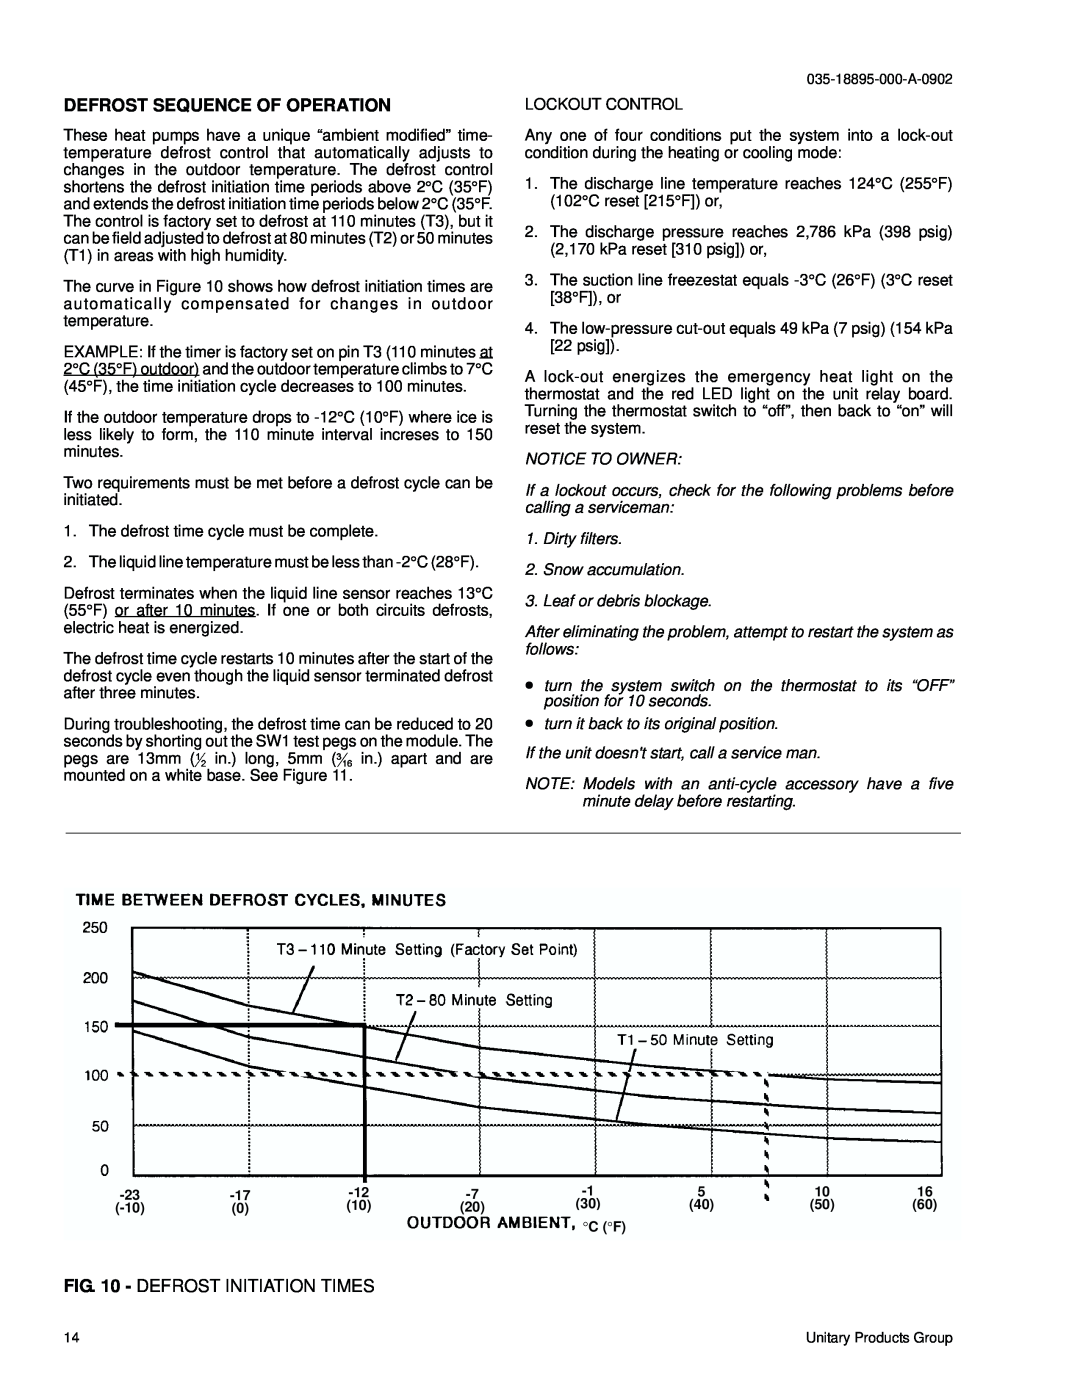 York B2CH180 installation instructions Defrost Sequence Of Operation, Defrost Initiation Times 